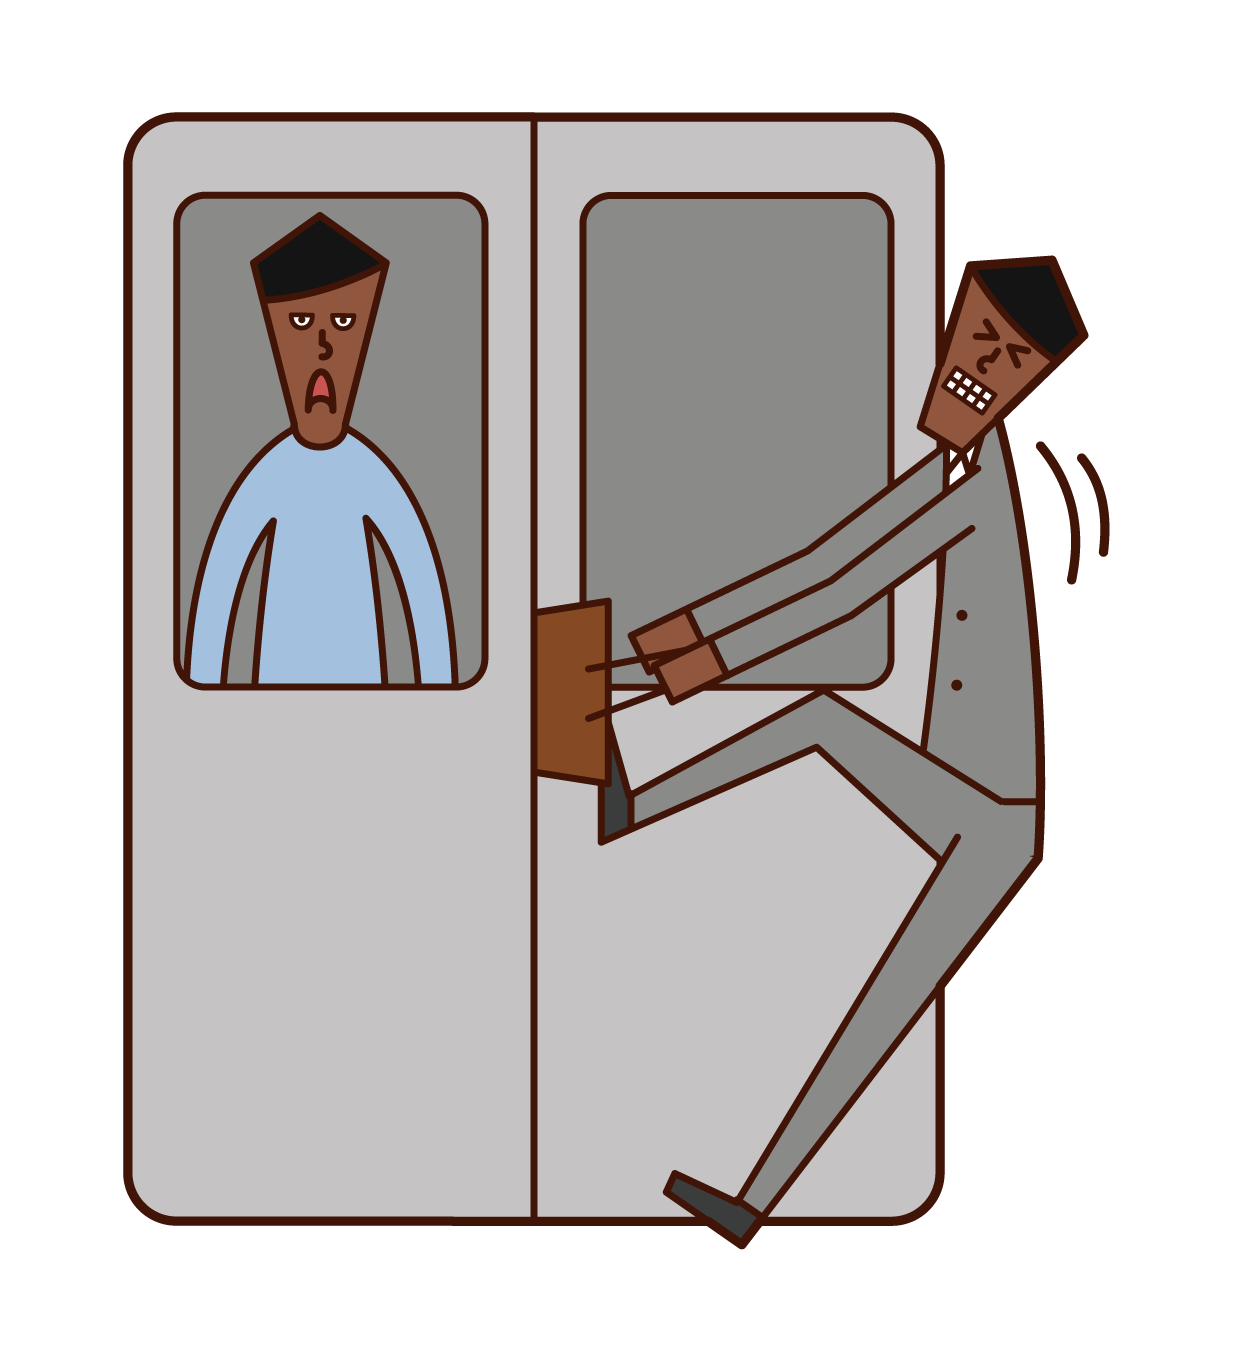 Illustration of a man with luggage caught in a train door